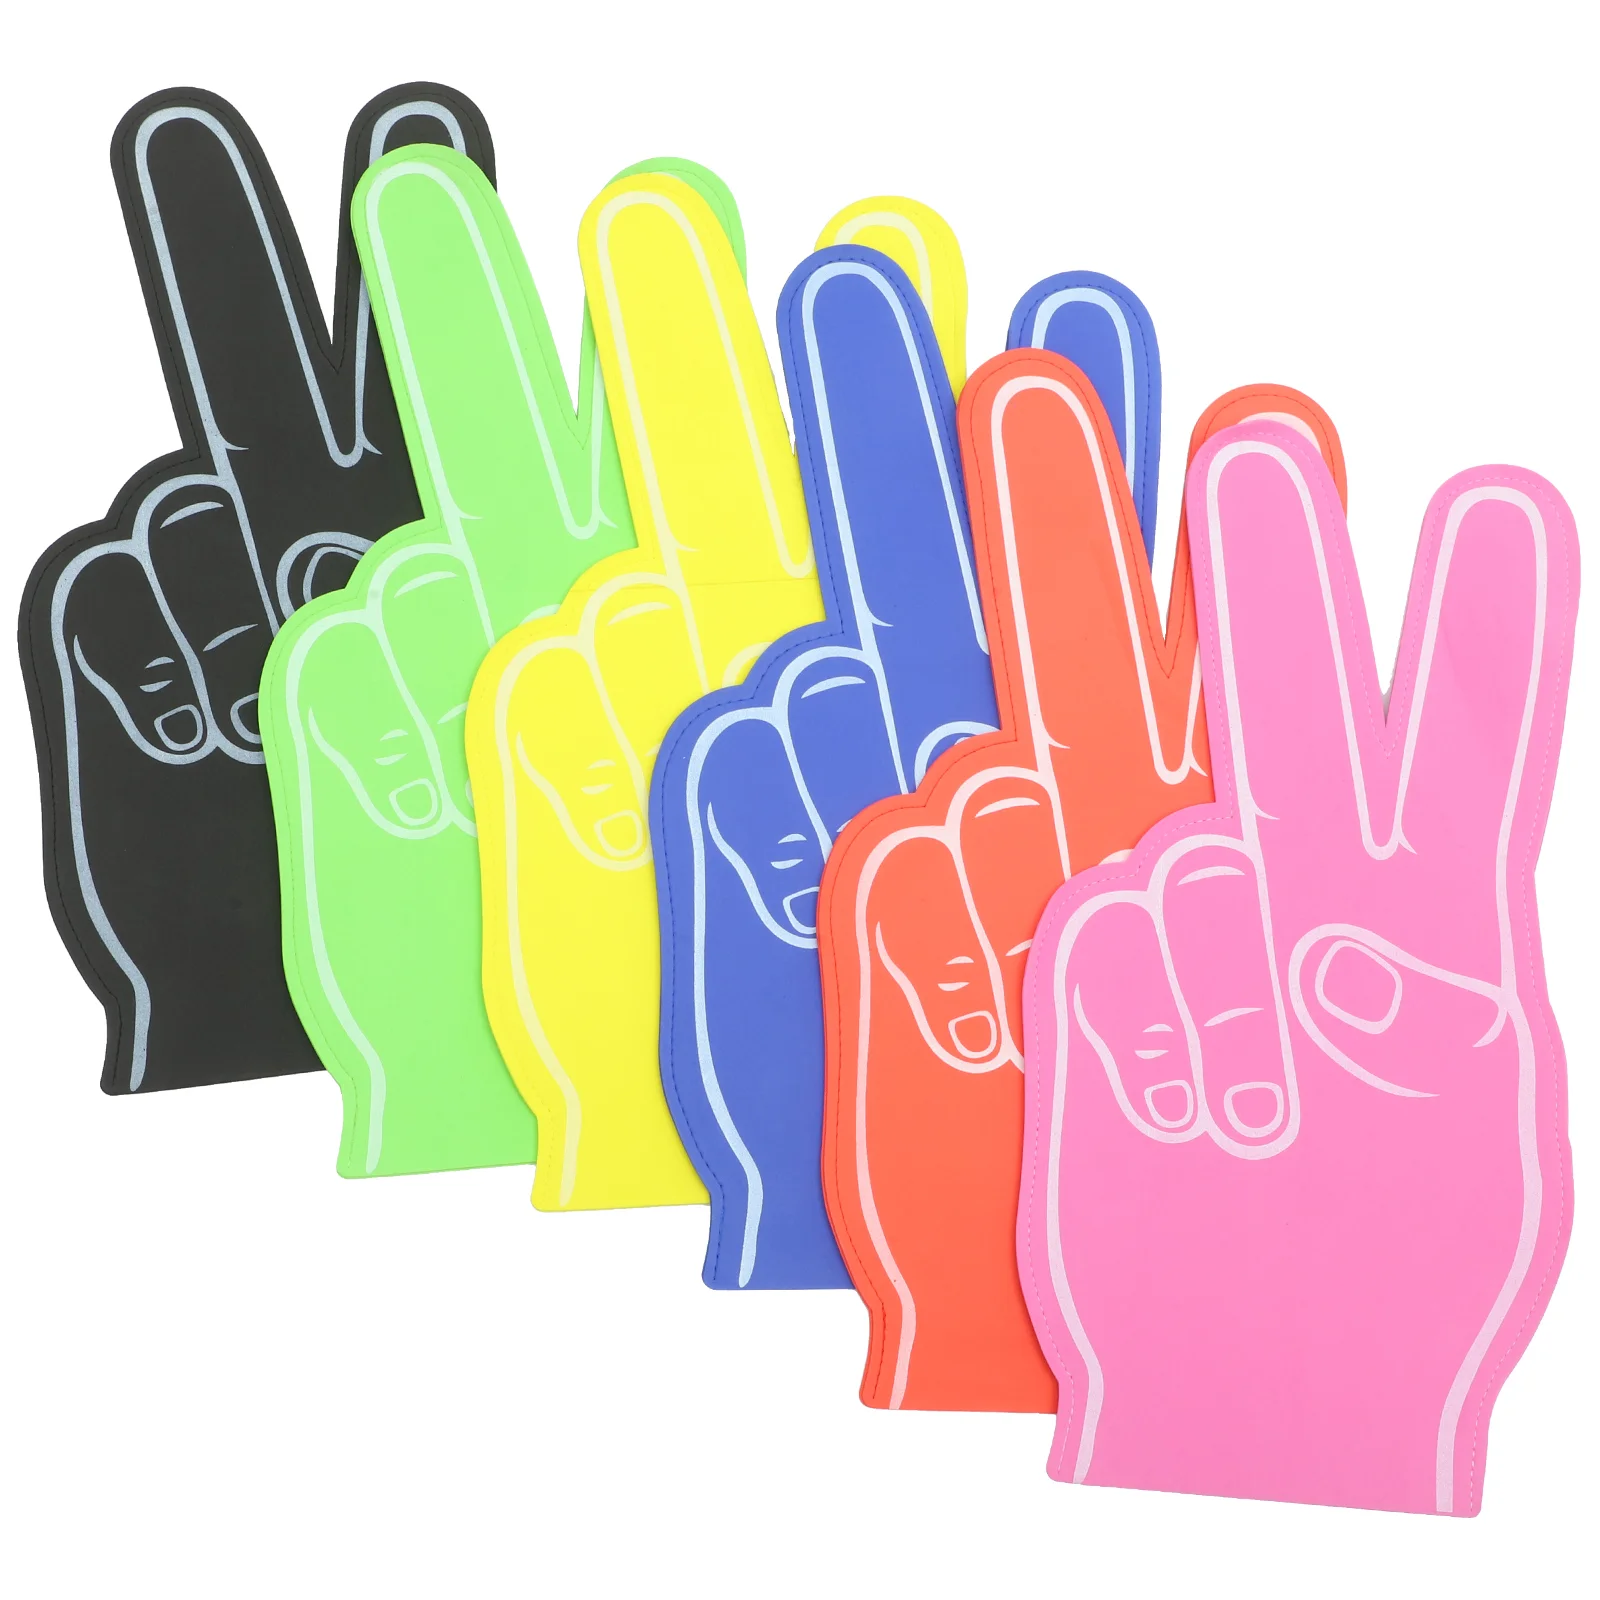 6 Pcs Exercise Gloves Foam Fingers Football Game Noise Makers Hand Cheerleading Sports Party Toys